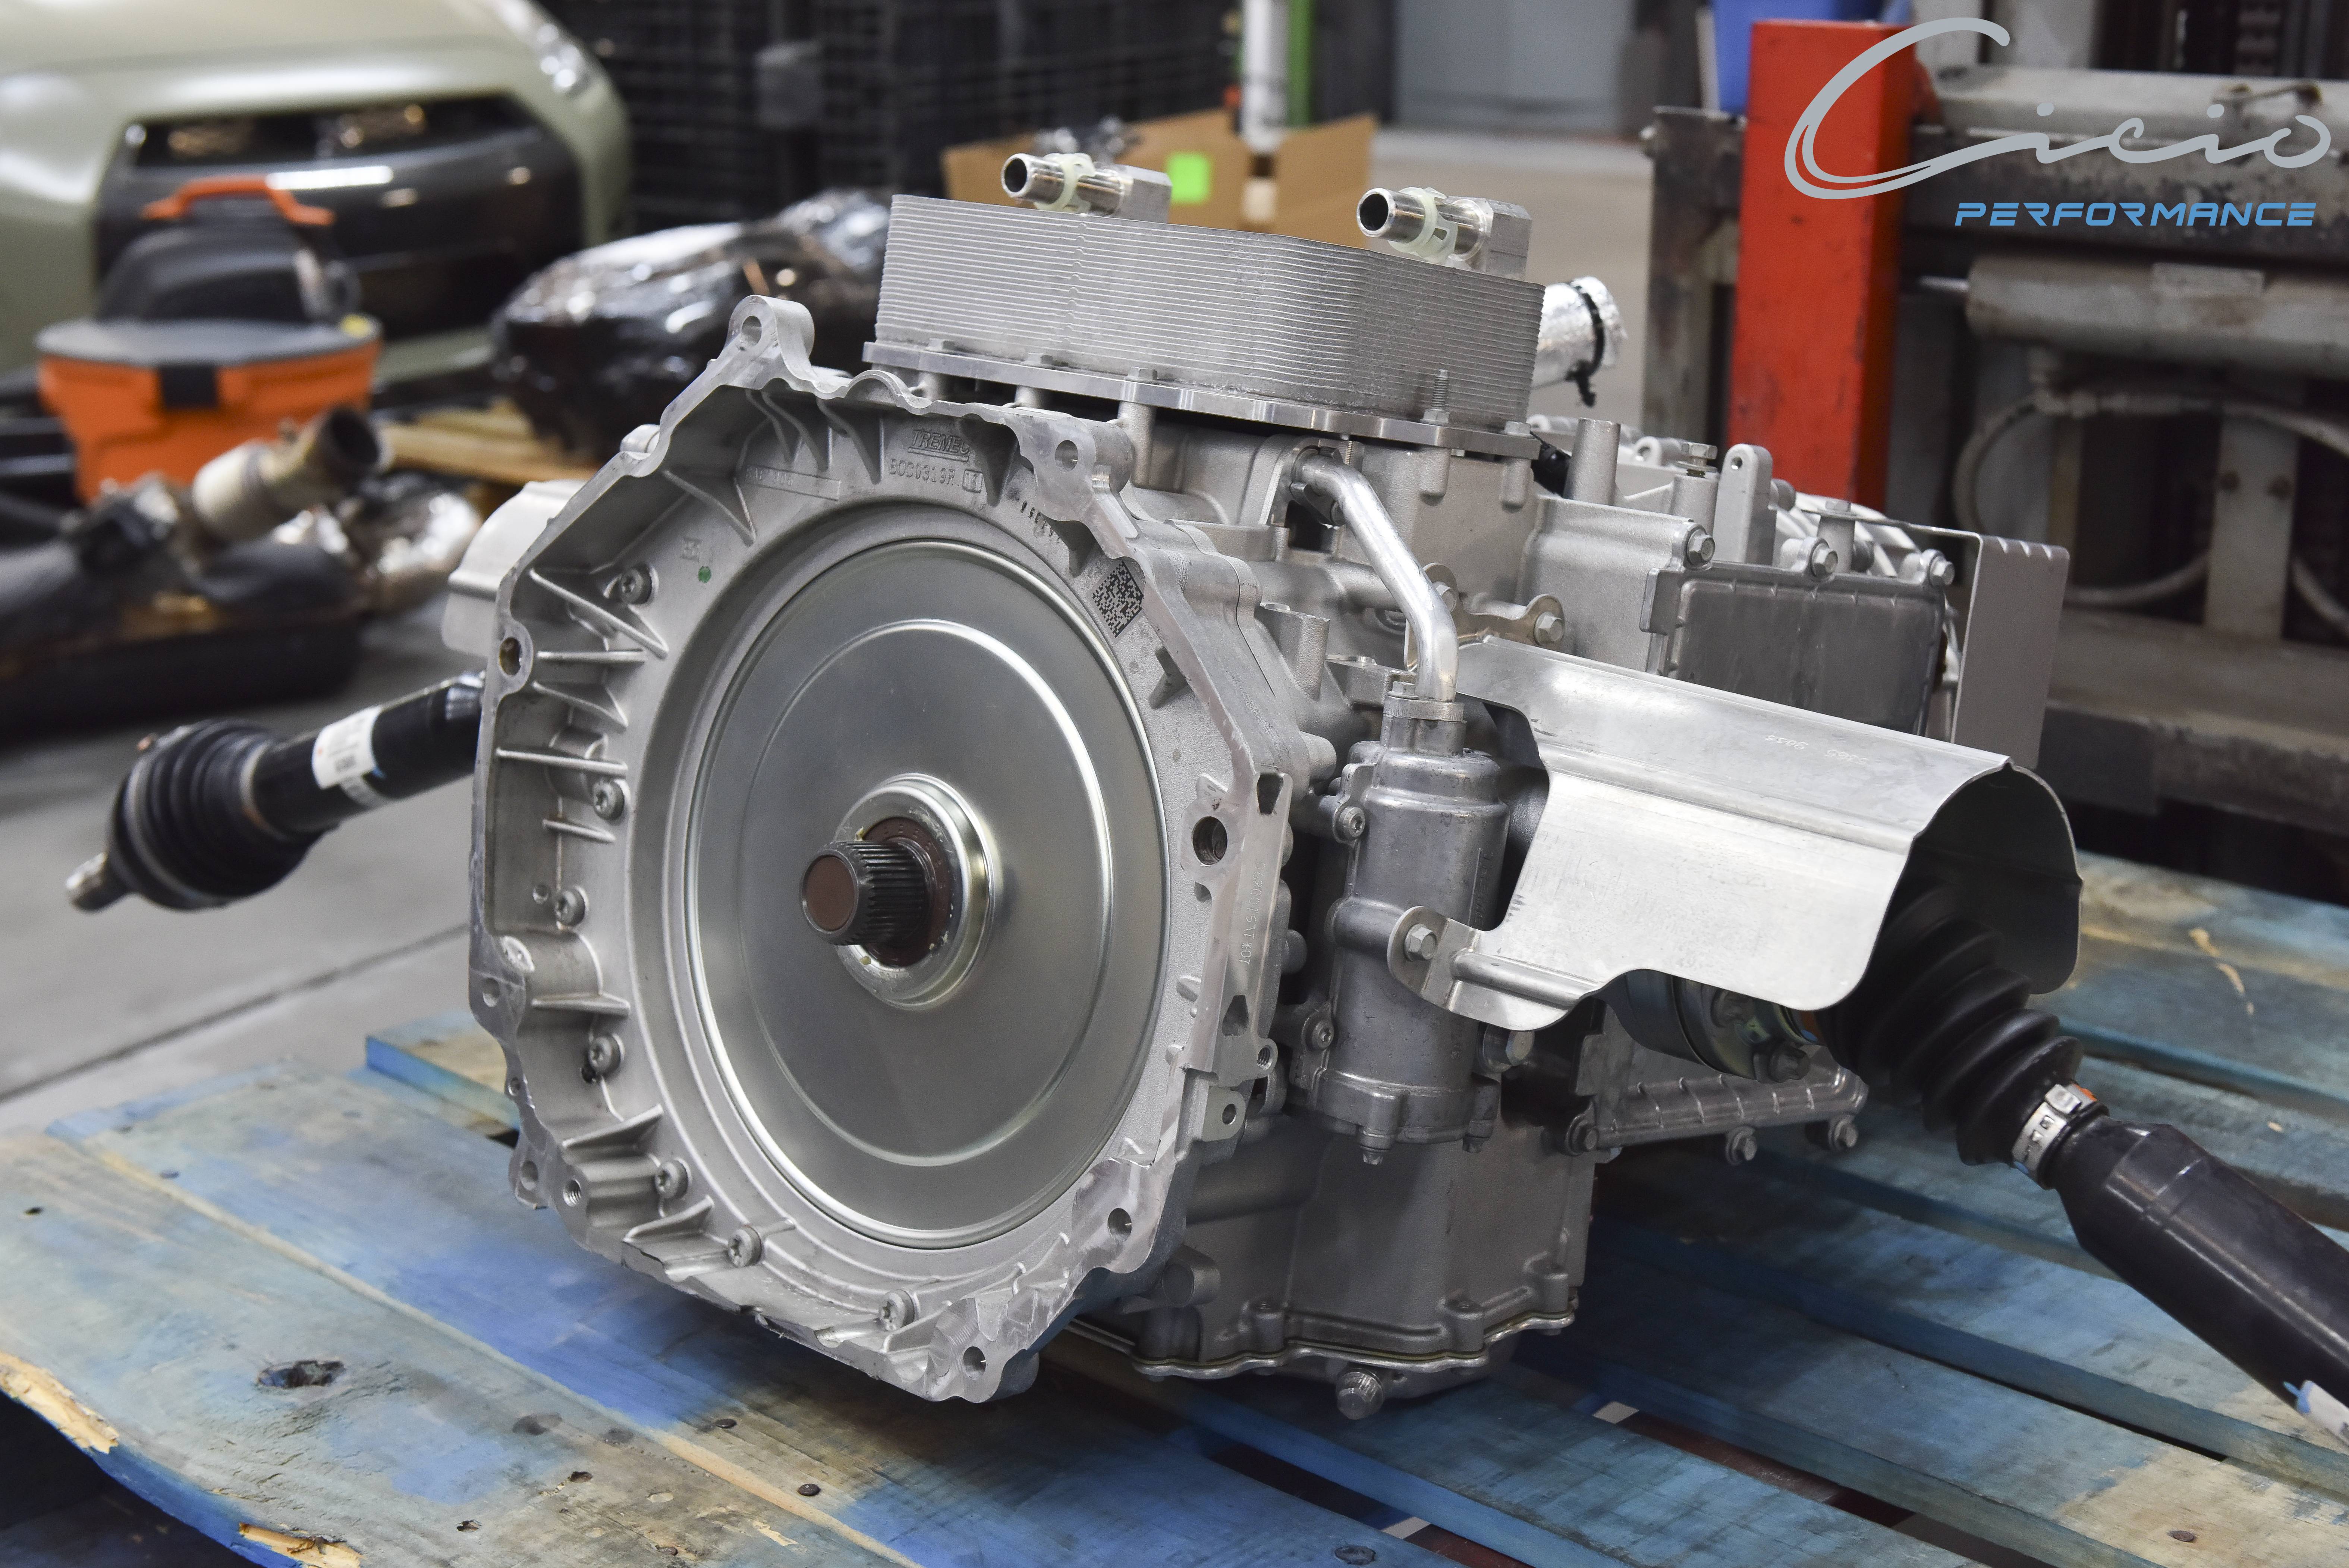 C8 Corvette Getting Clutch Upgrade, Extreme Duty Gears From Dodson  Motorsport - autoevolution